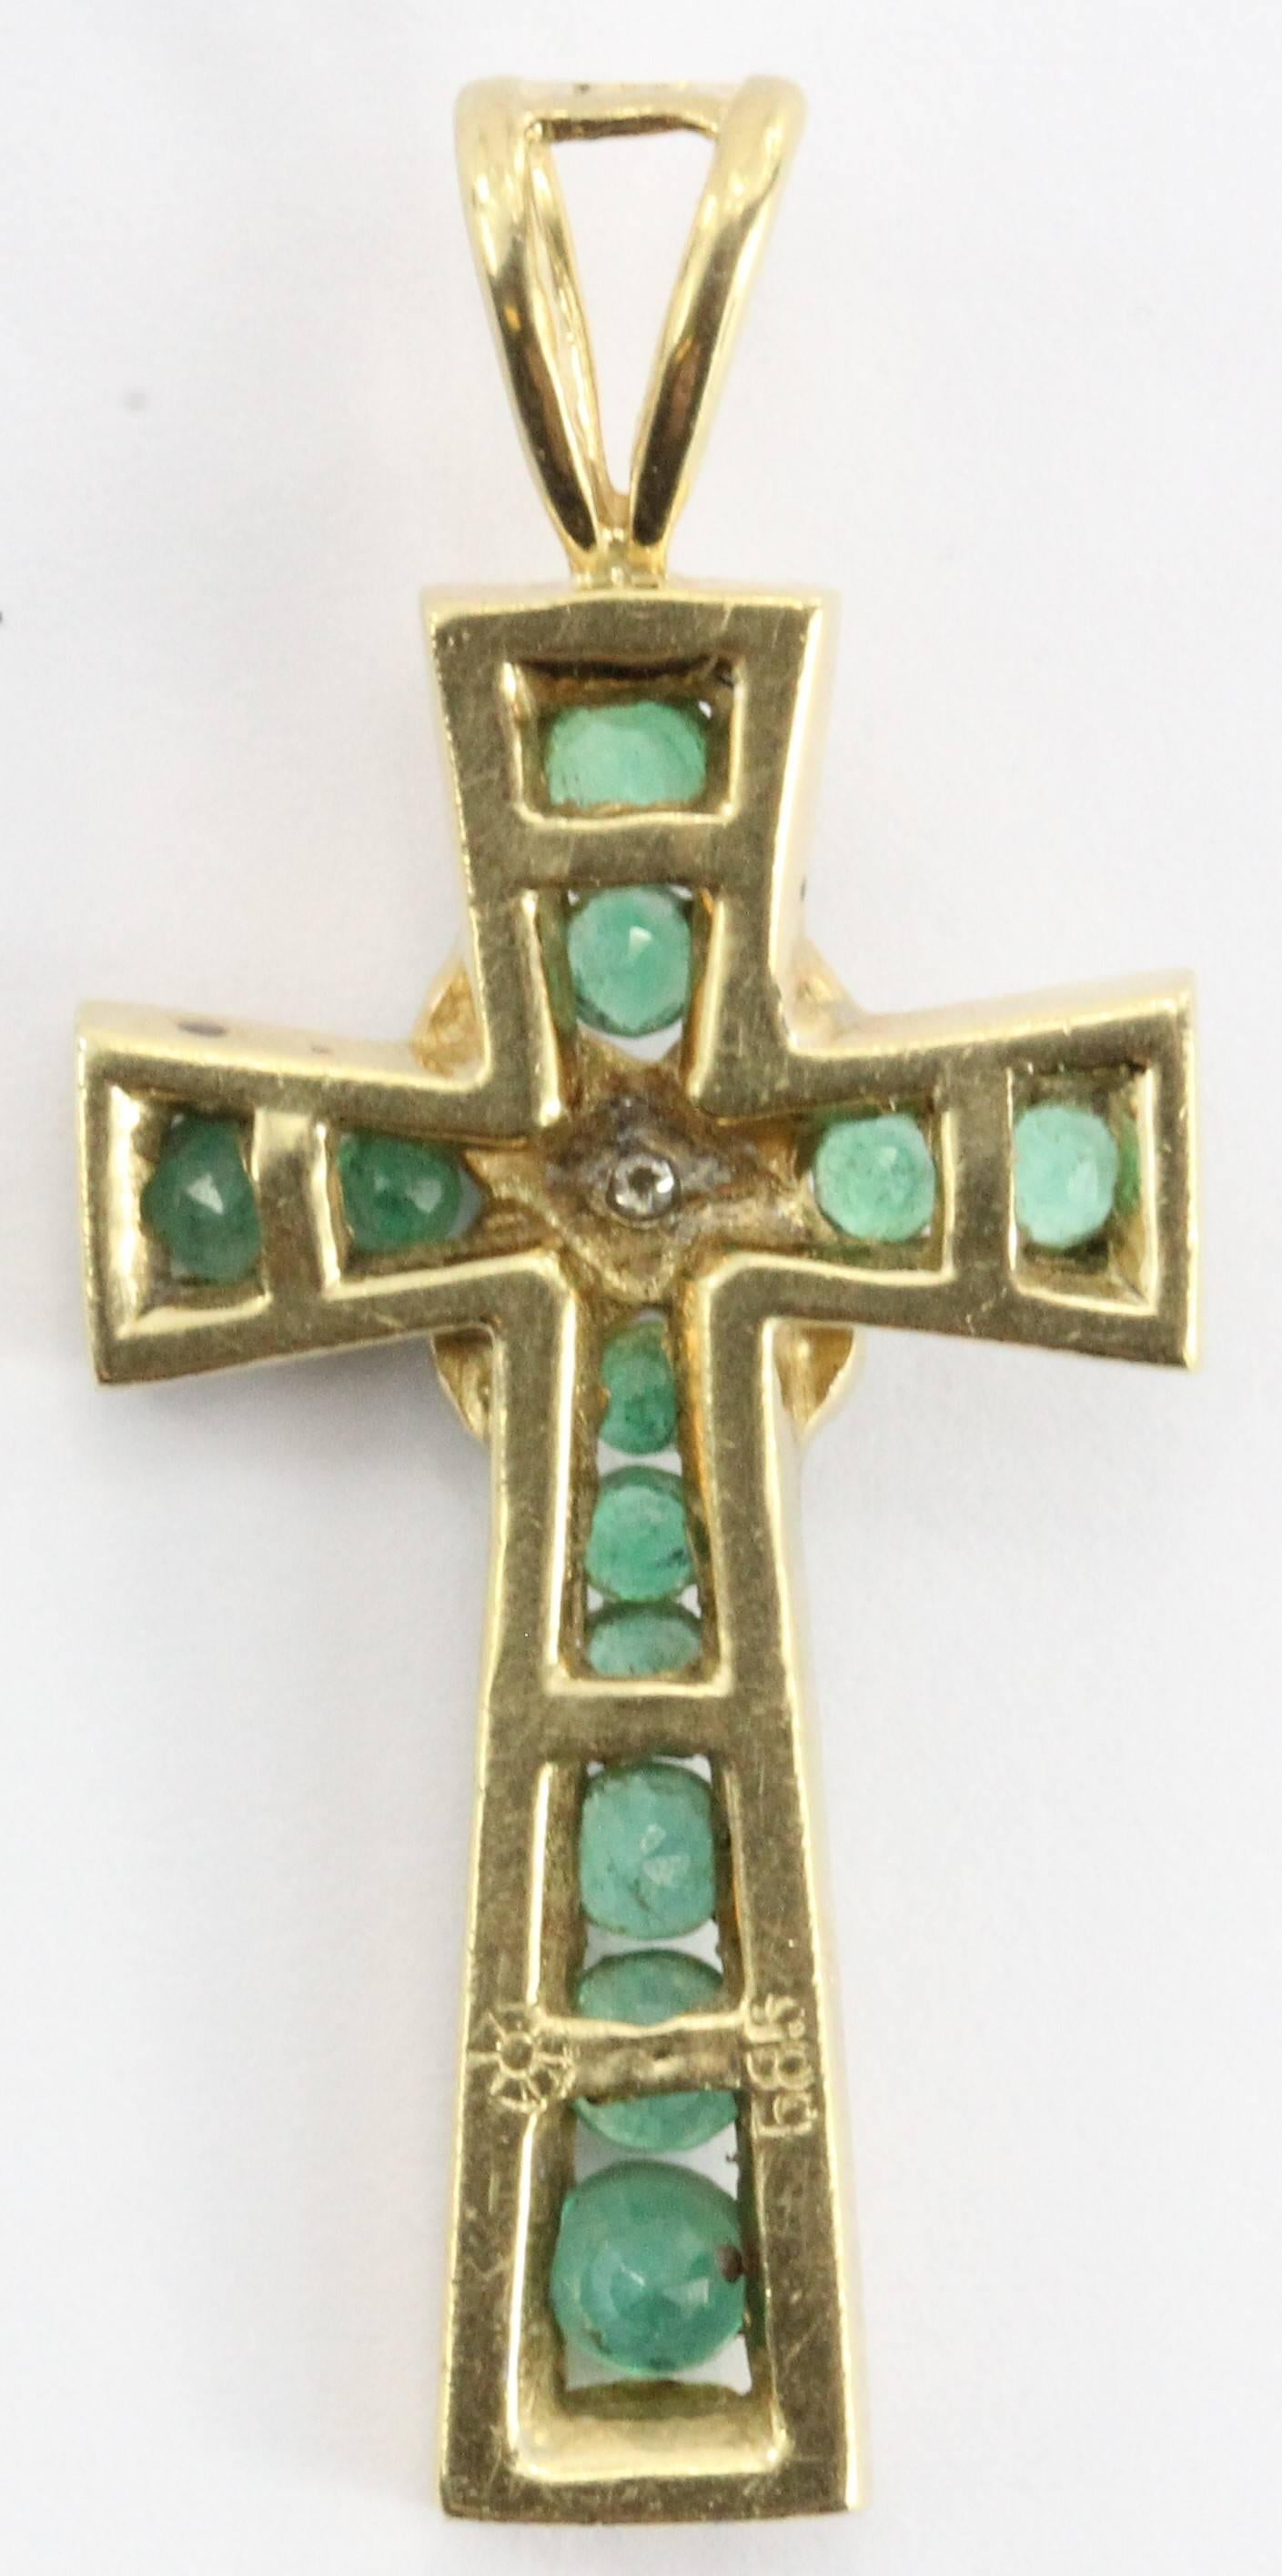 Vintage 14K yellow gold cross pendant set with about 1 carat of Columbian Emeralds and one small diamond chip in the center. The piece is in excellent estate condition and ready to wear. It is hallmarked 585 for 14K and the company hallmark that I